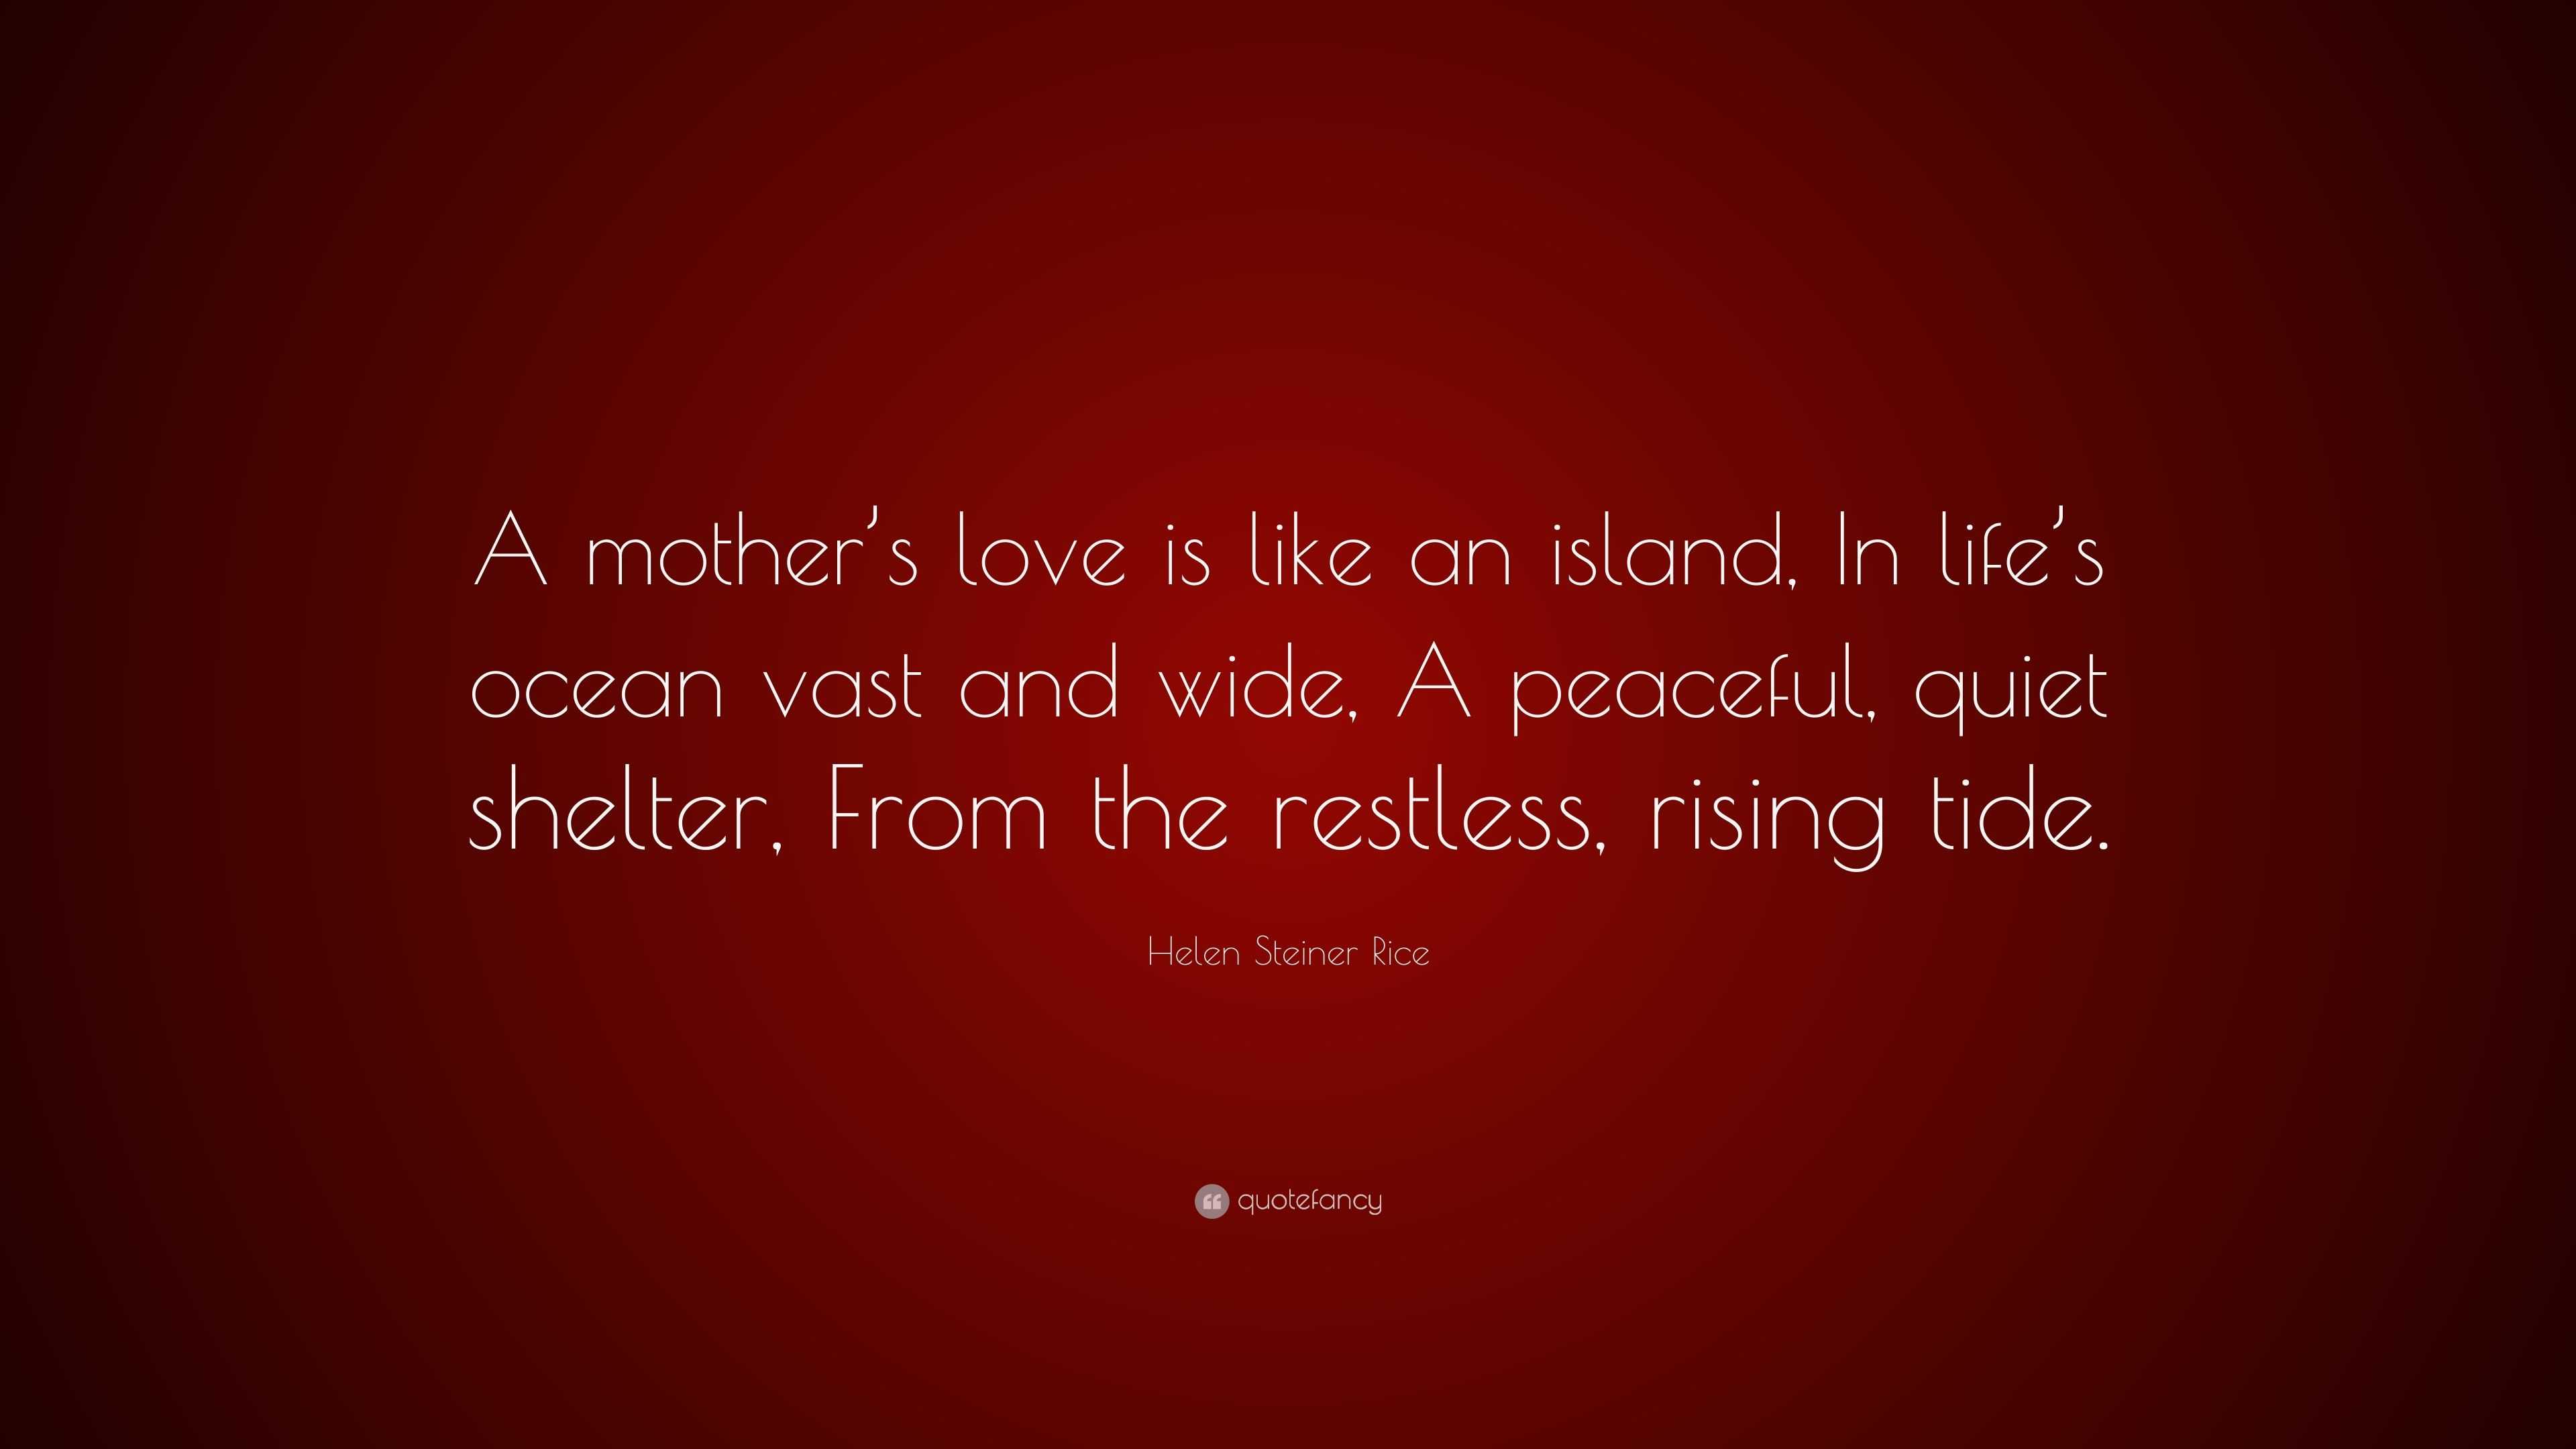 Helen Steiner Rice Quote “A mother s love is like an island In life s